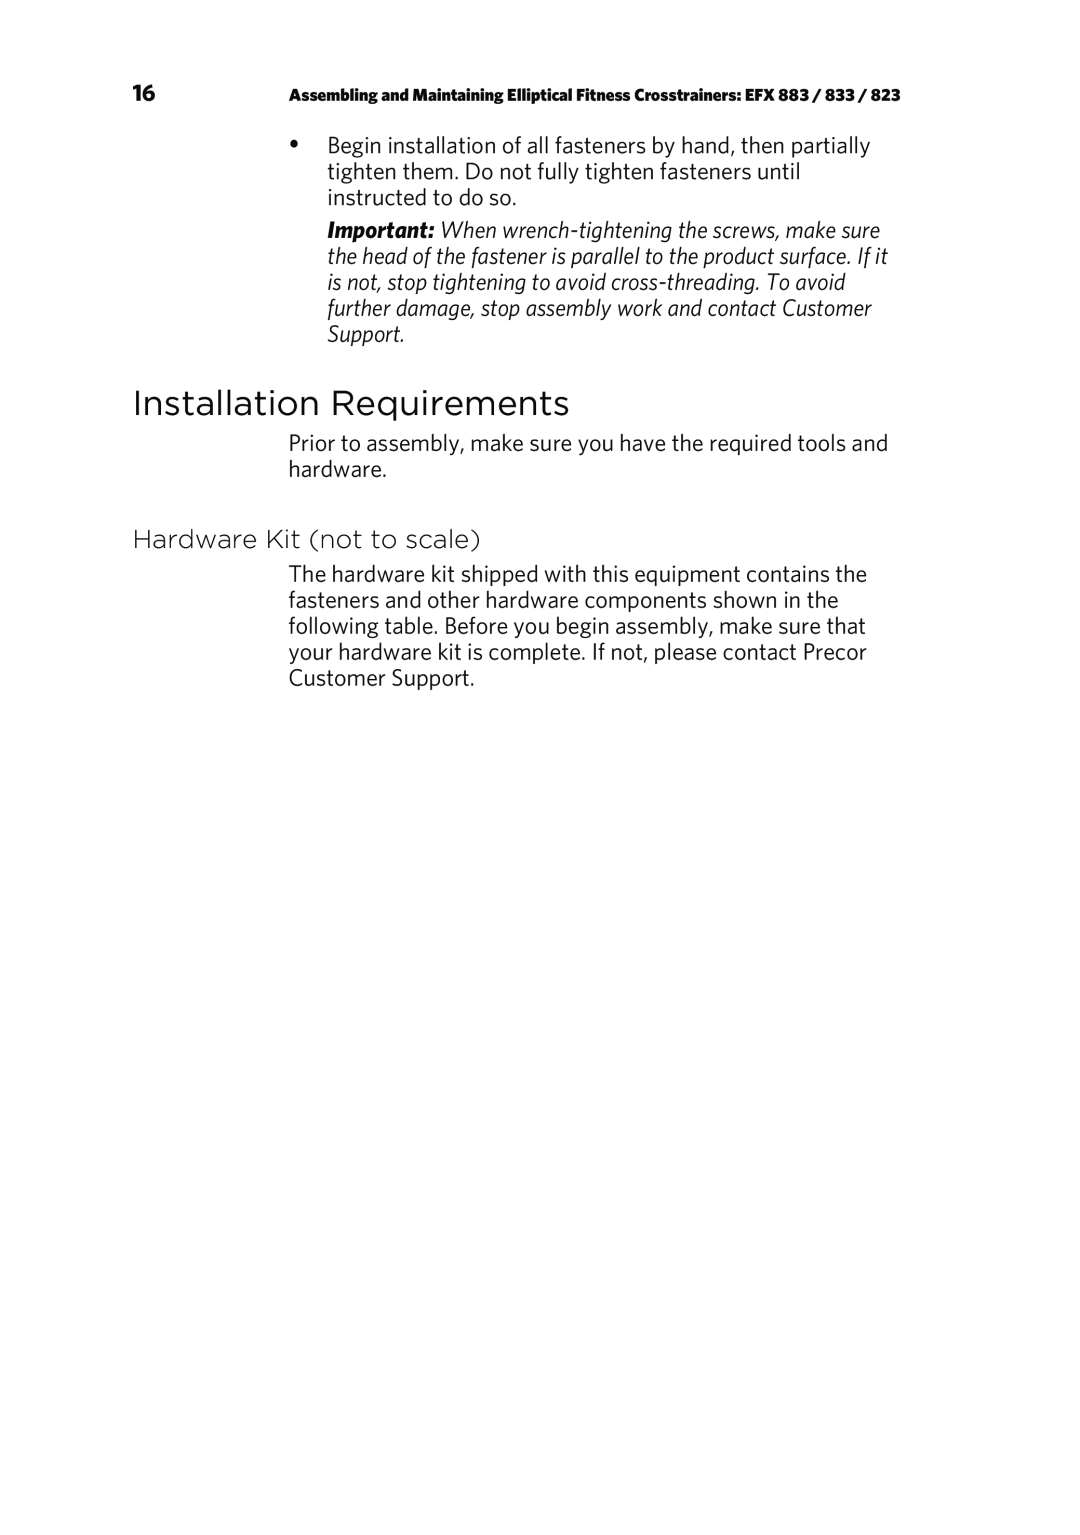 Precor P80 manual Installation Requirements, Hardware Kit not to scale 